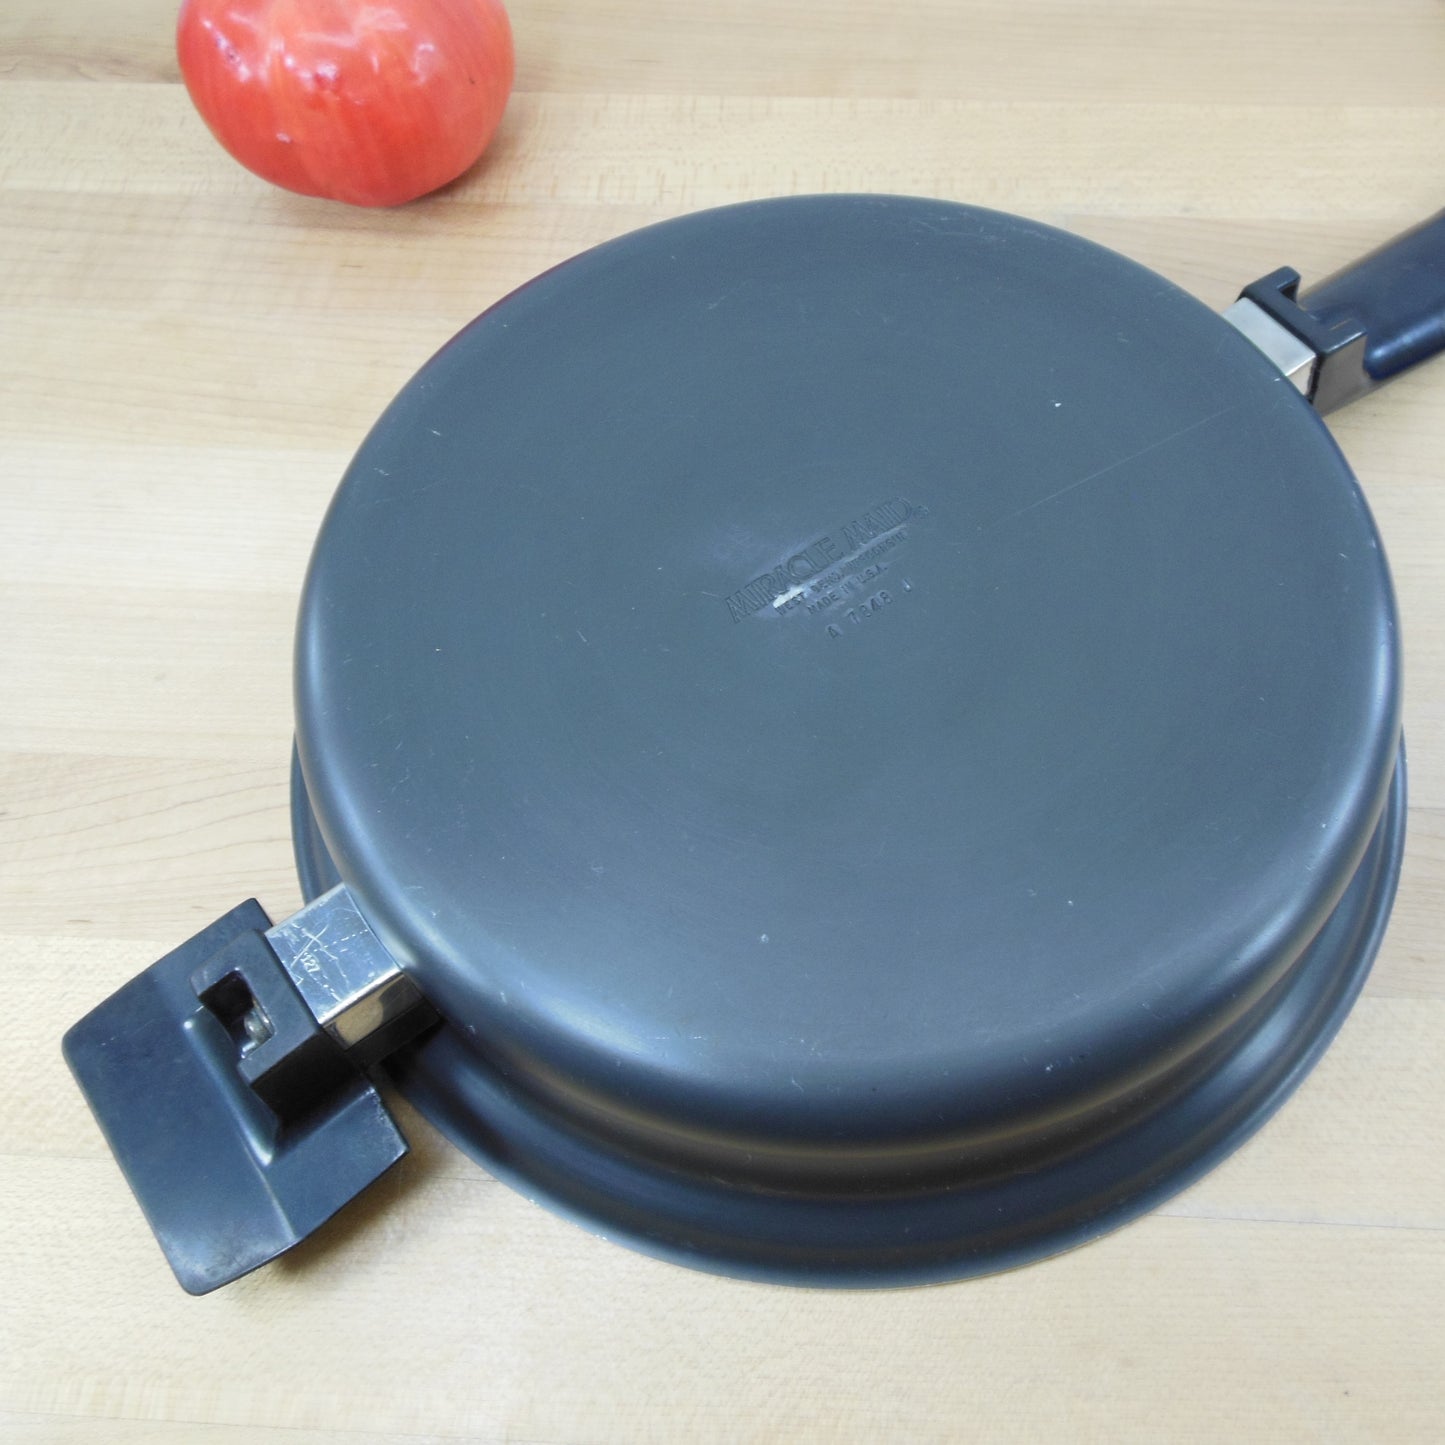 West Bend Miracle Maid Dome Lid Turkey Roaster Pan - Anodized